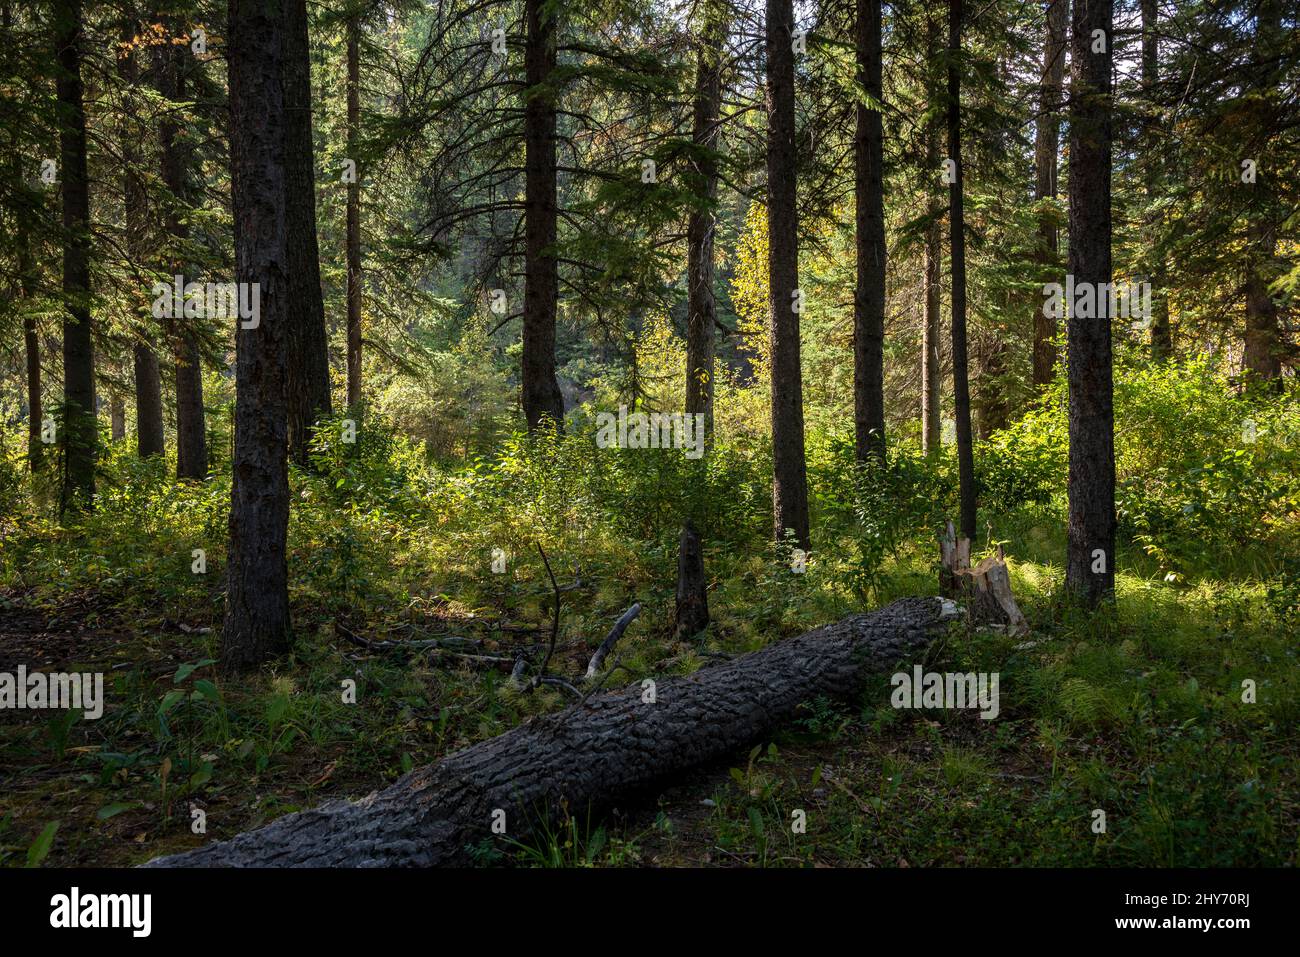 Evergreen tree forest with sunlight breaking through the trees in Alberta, Canada. Stock Photo